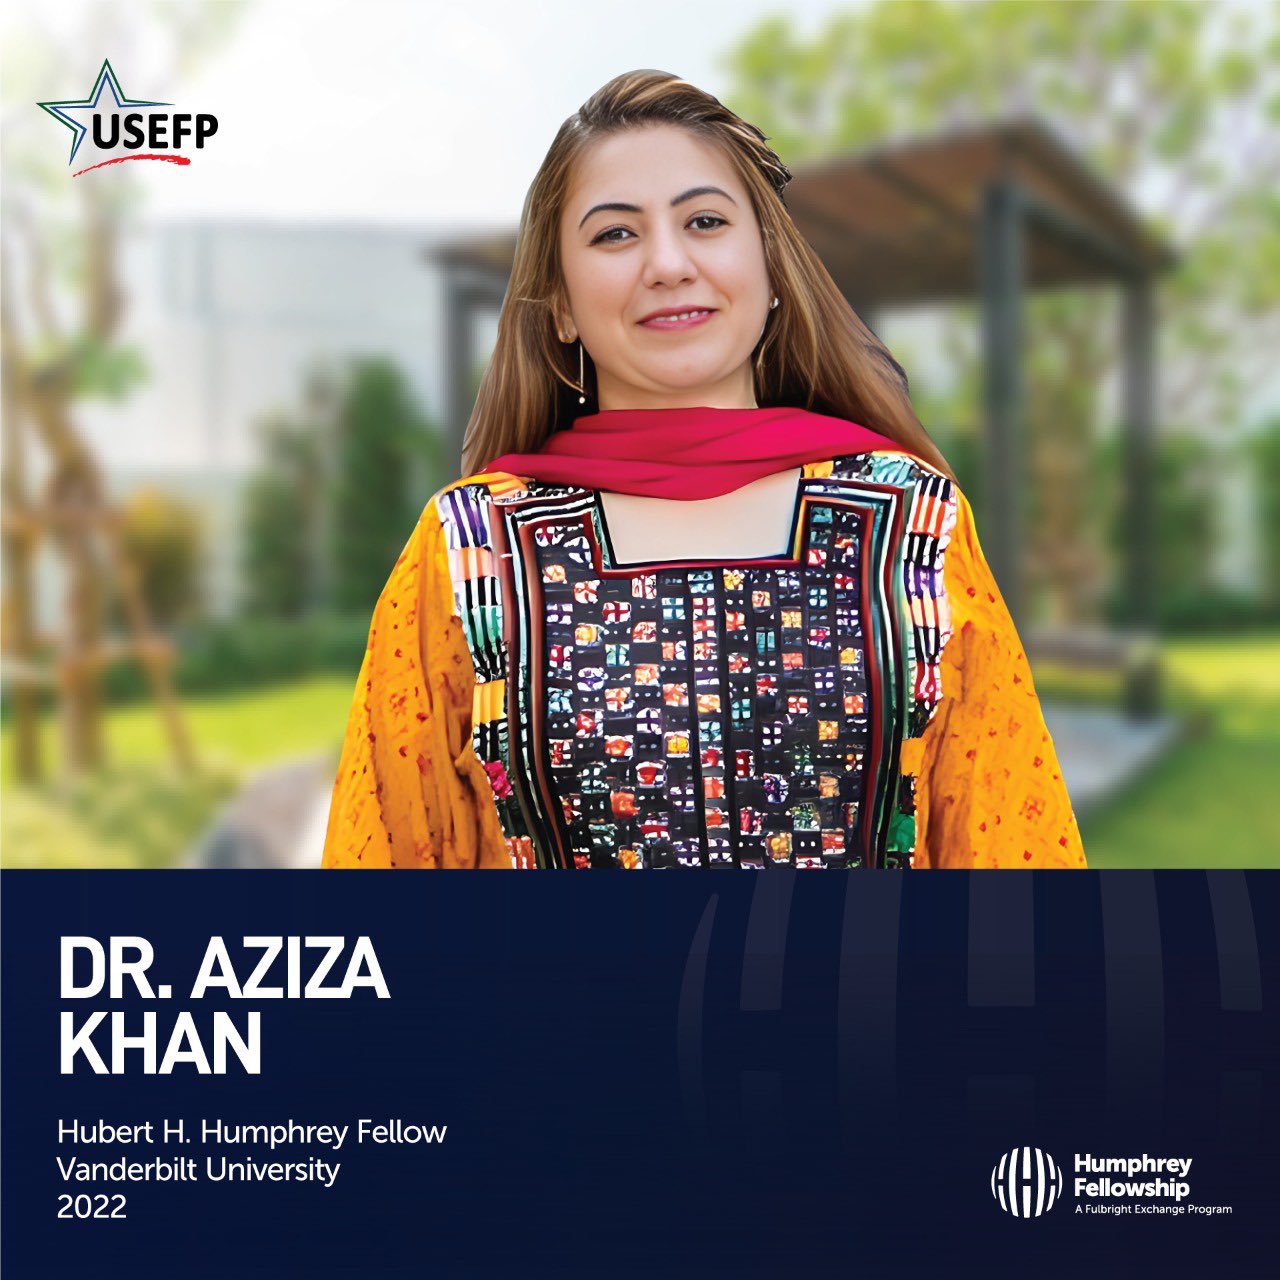 USEFP on Twitter: "Recognizing the need for girls' education in her  province, Balochistan, #Humphrey Fellow Dr. Aziza Khan is uplifting the  literacy rate and increase access to schools for girls. She aims